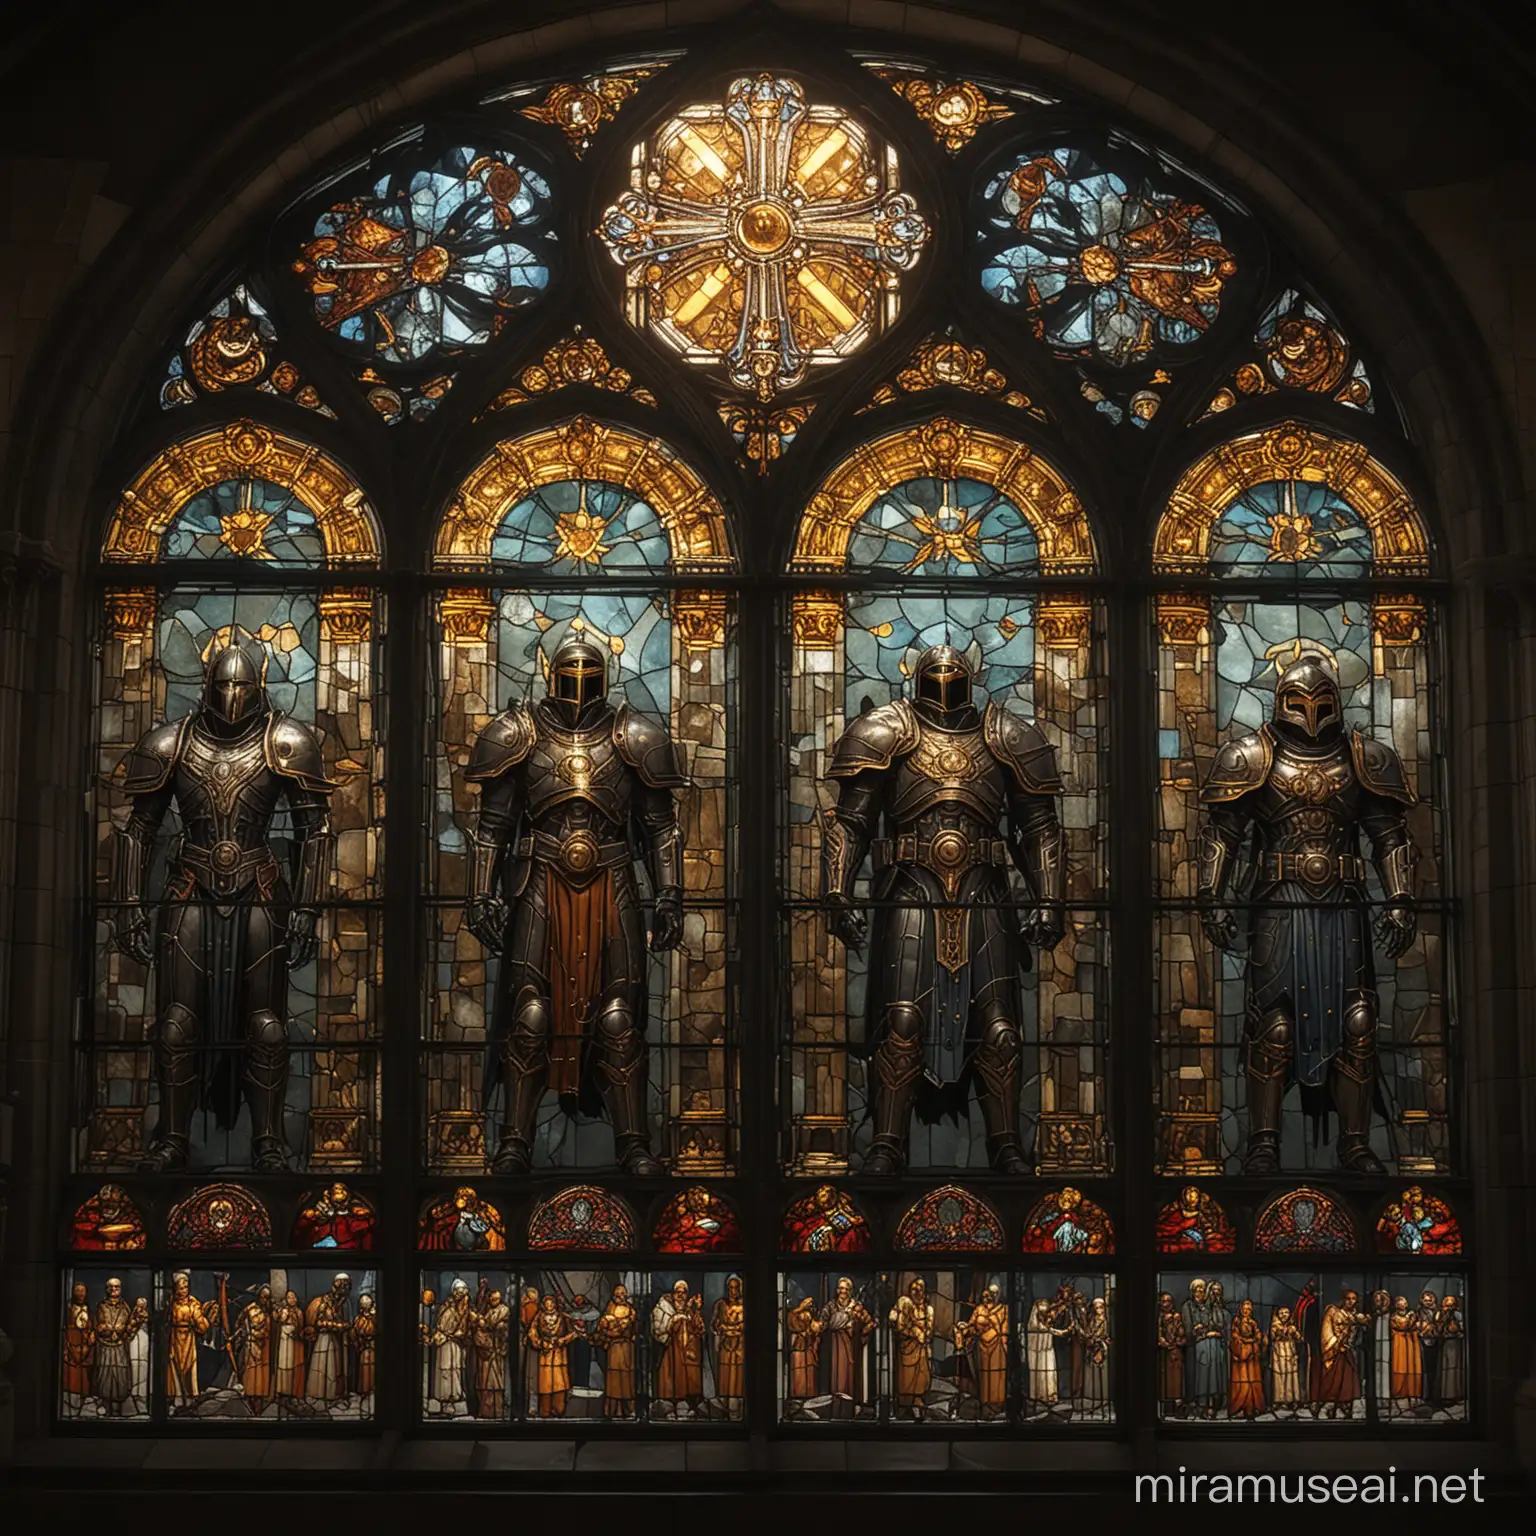 Train an image-generating AI to create a gothic-inspired stained glass window image featuring an impressive formation of Automatons from the game Helldivers 2. The Automatons should march majestically in the window, dominating the scene. The image should capture the dark and epic atmosphere of a church window and depict the Automatons in an impressive play of light